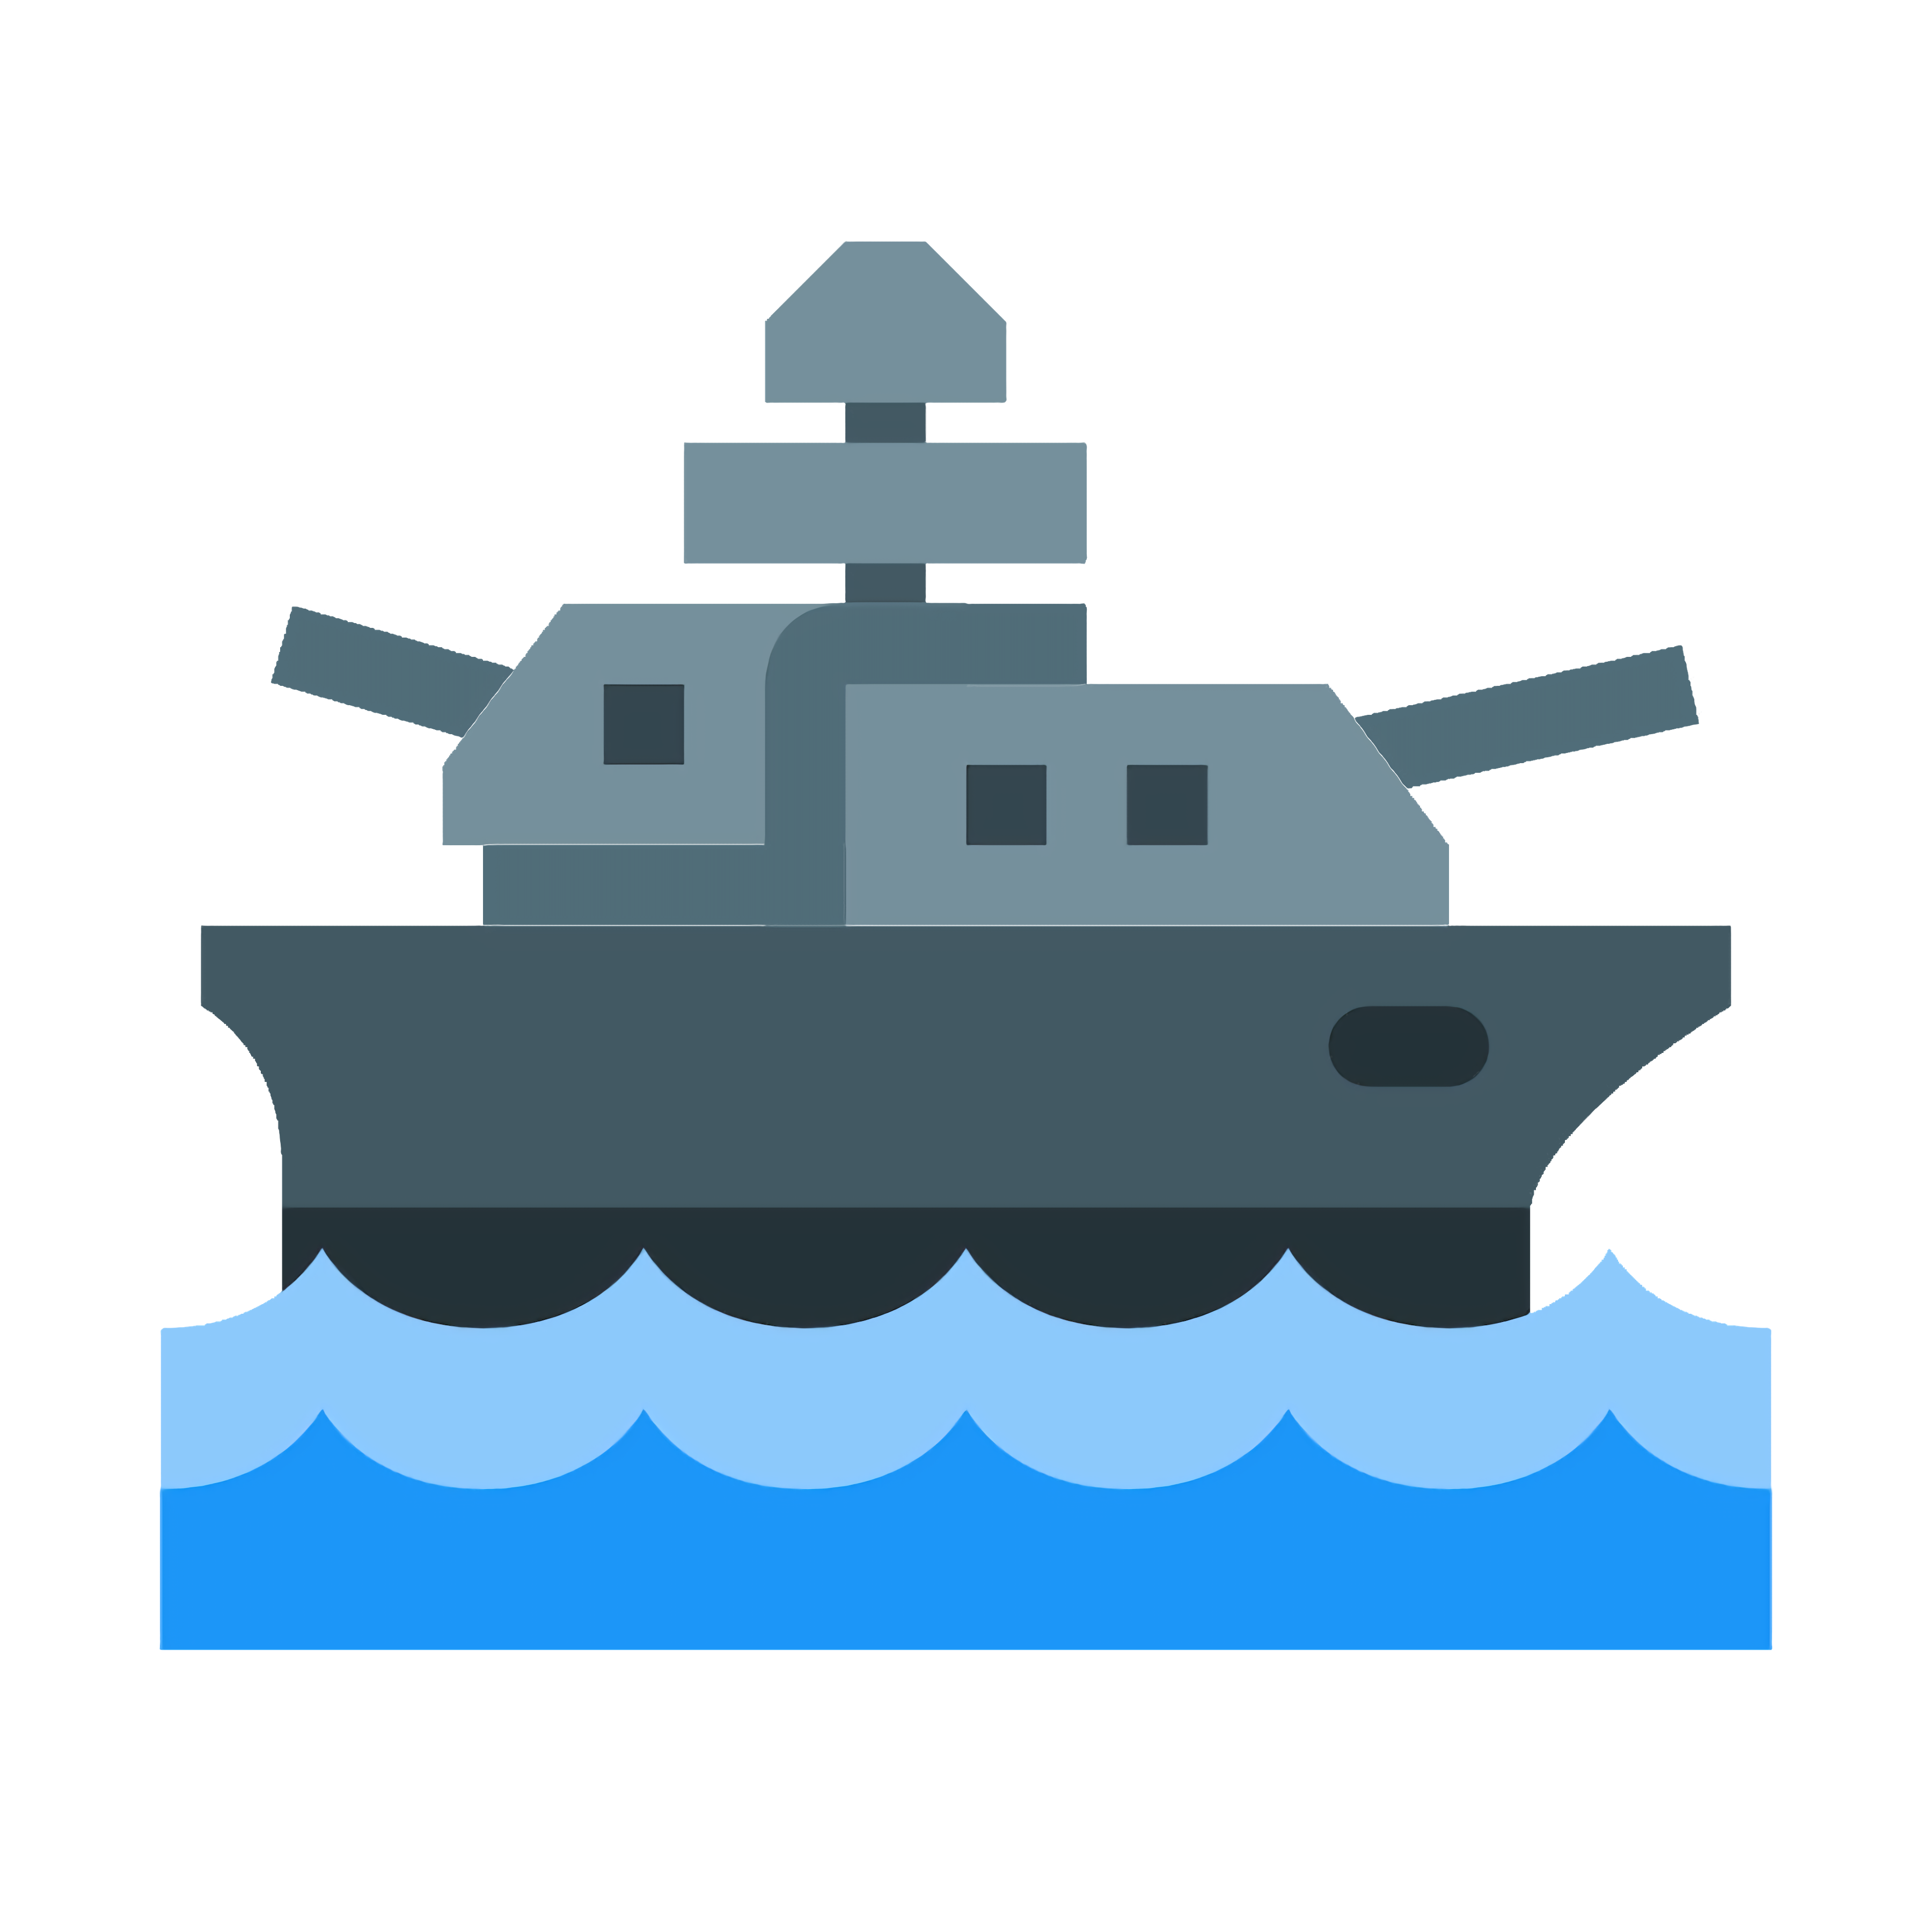 battleship game play online for free